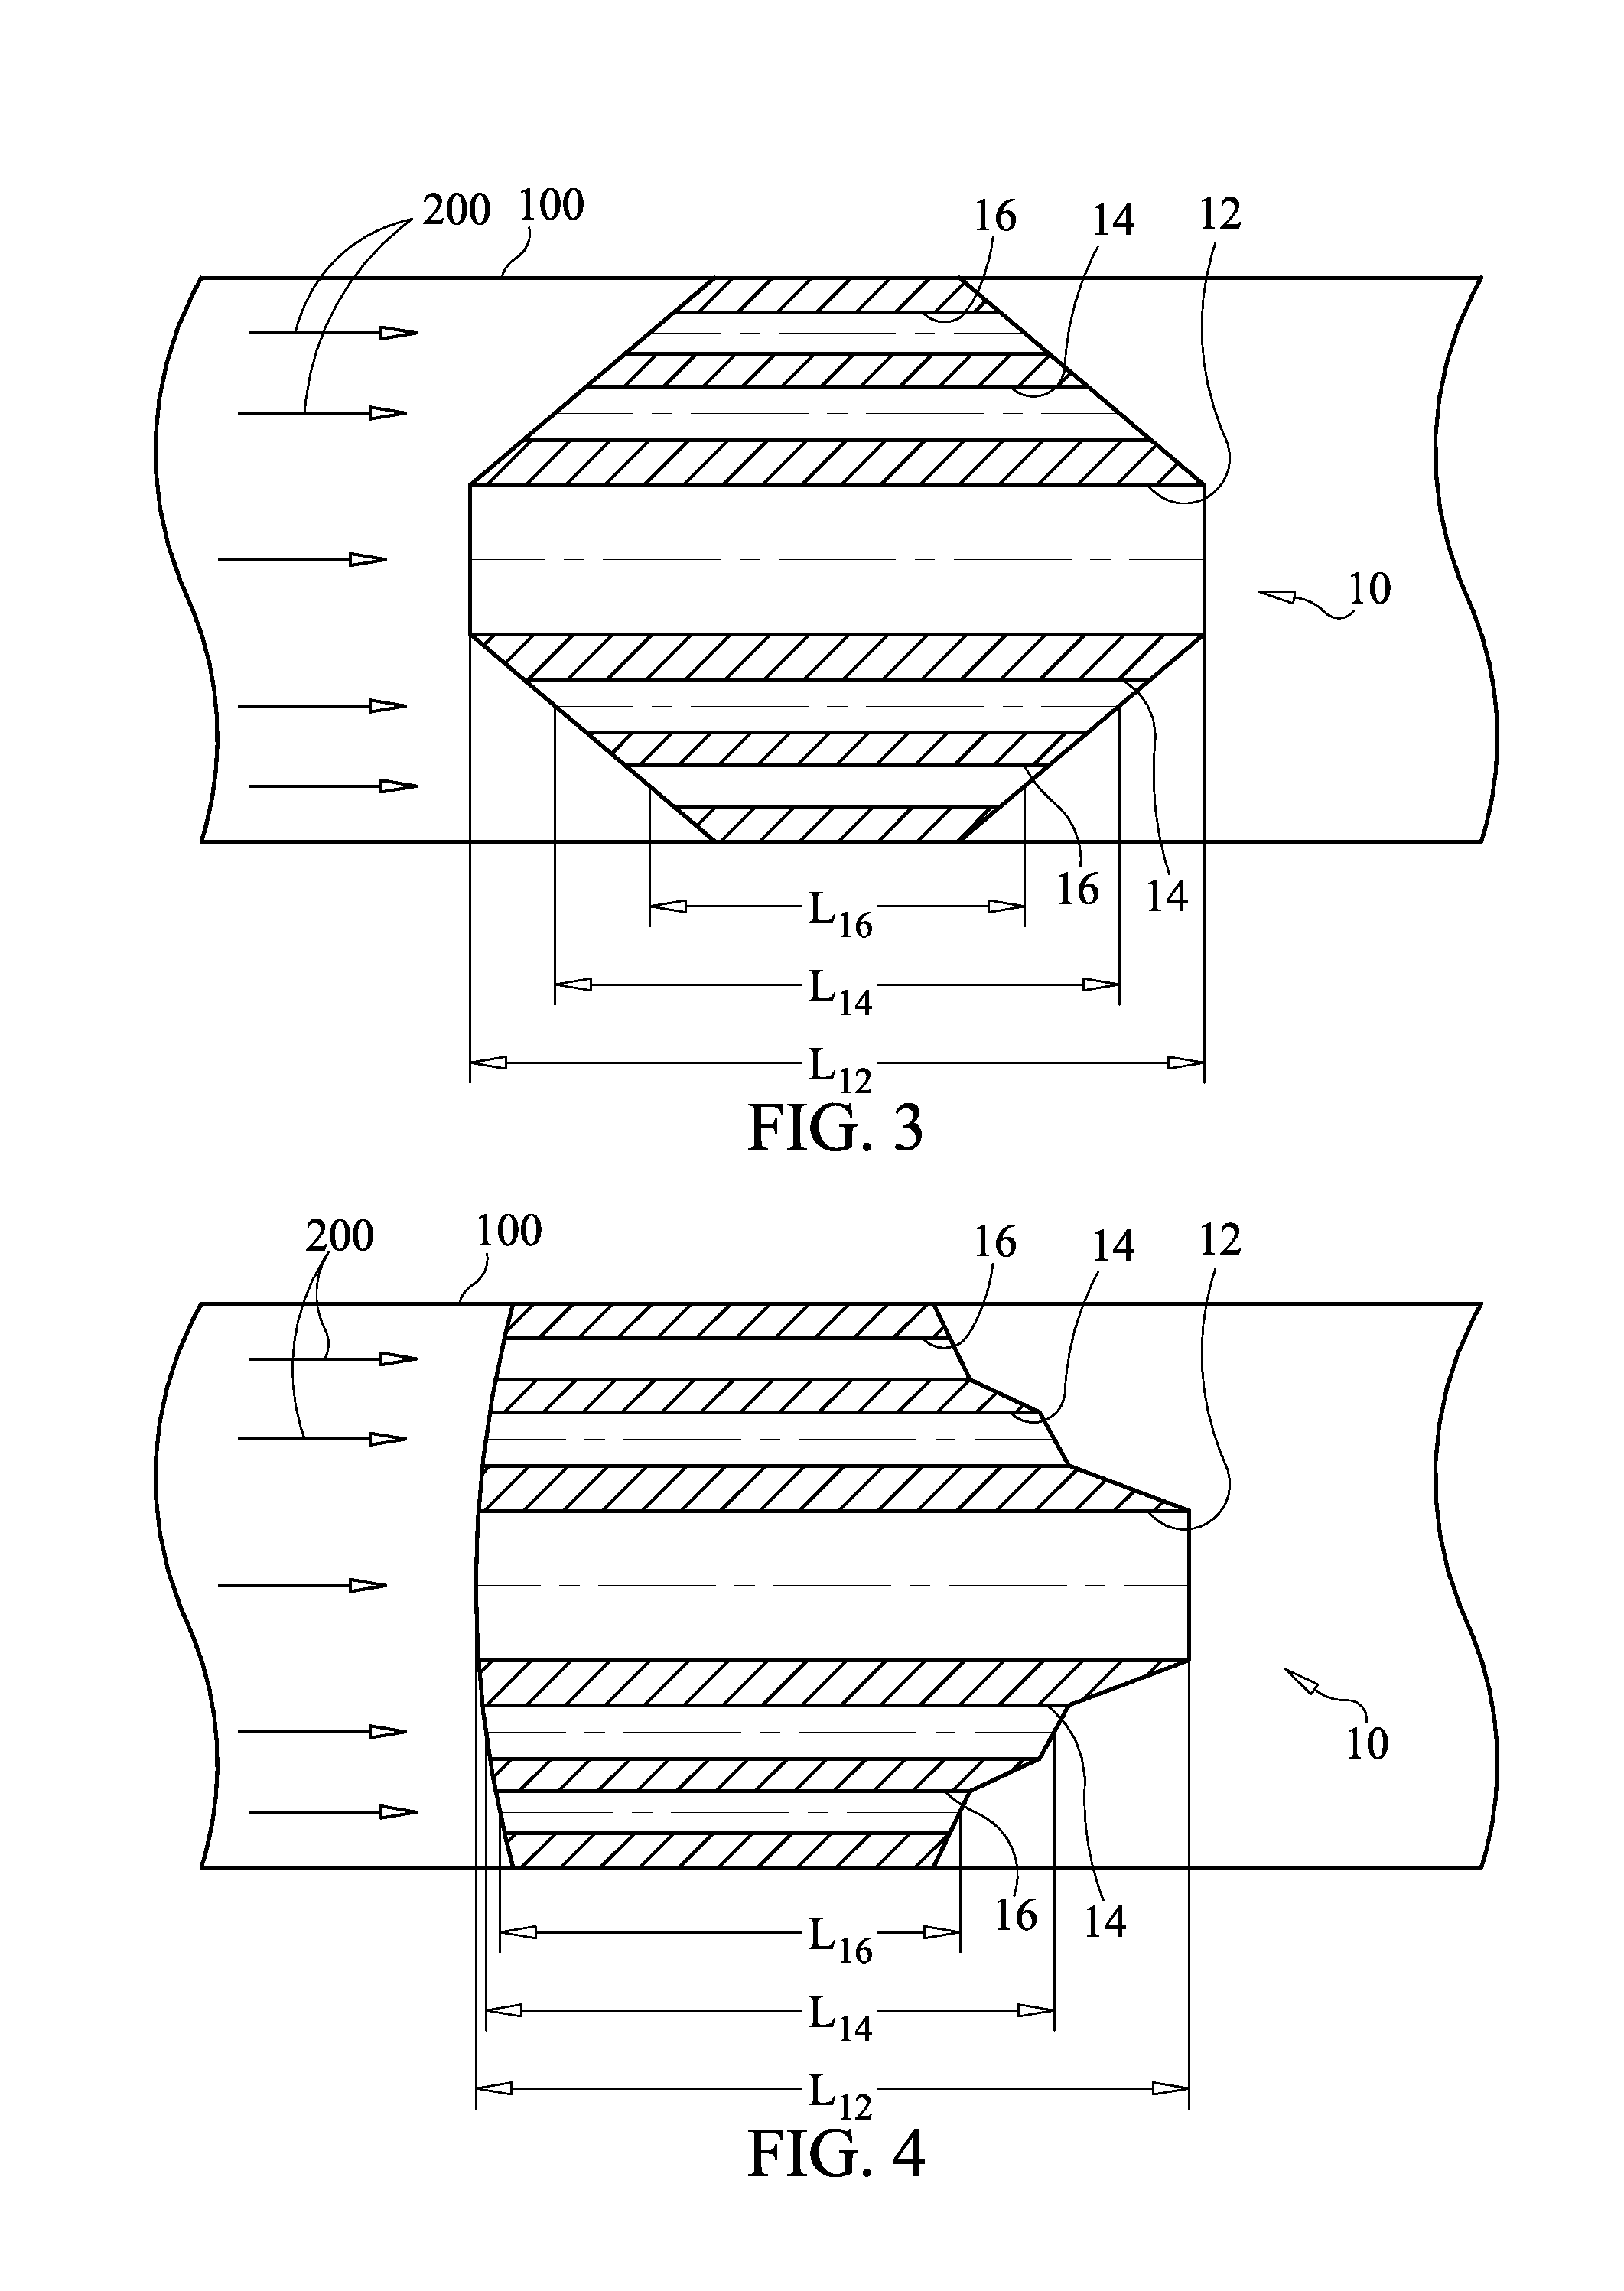 Flow plug with length-to-hole size uniformity for use in flow conditioning and flow metering